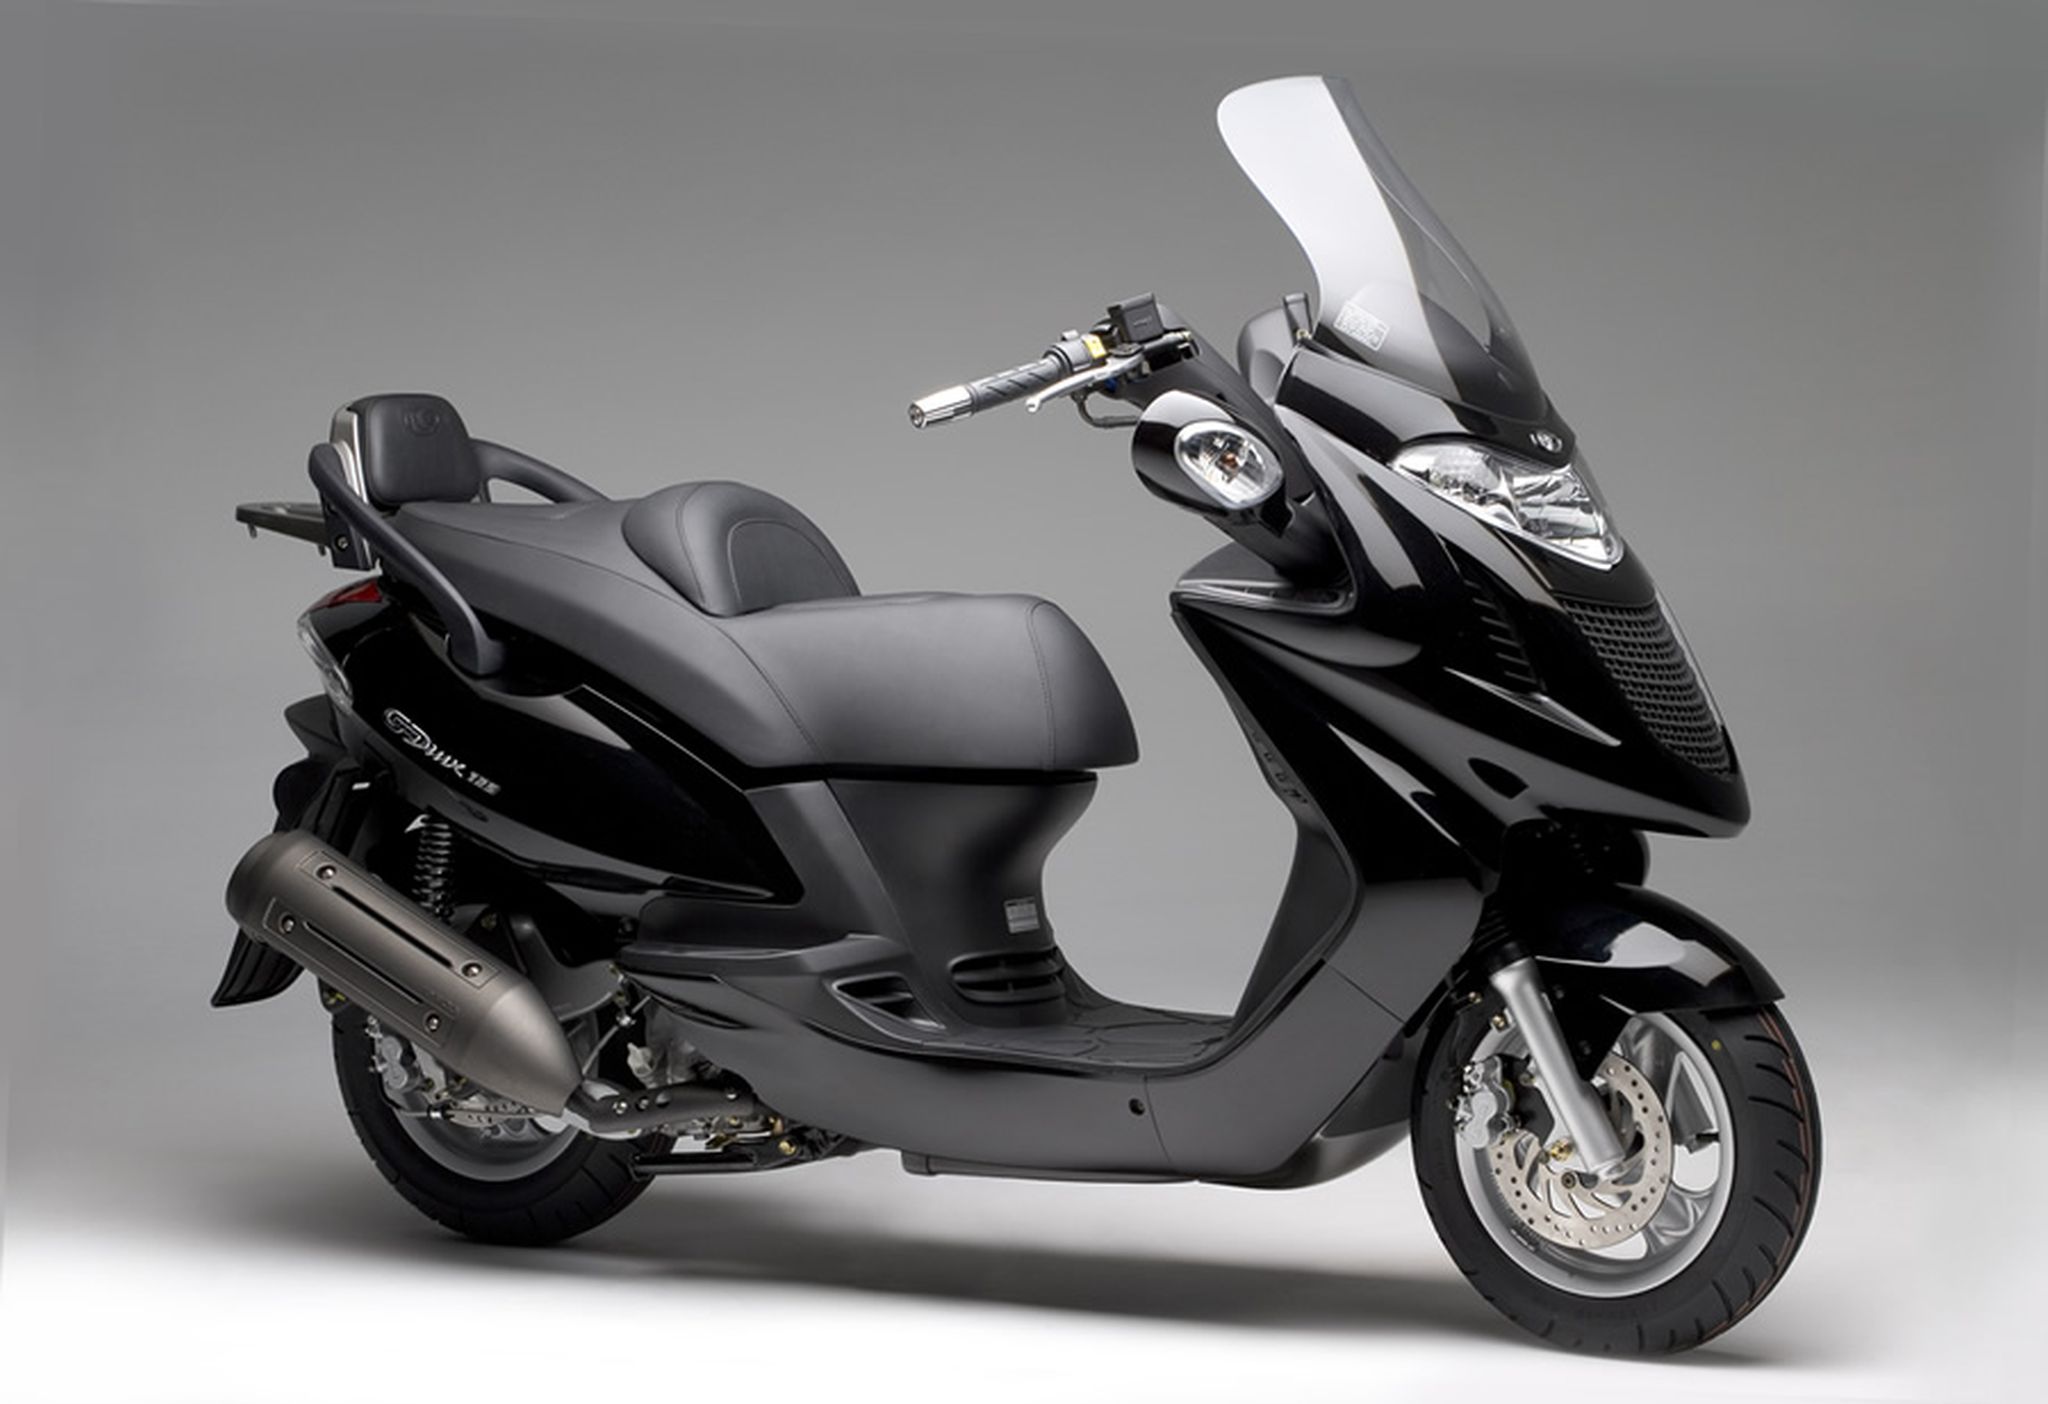 Kymco Grand Dink 125 - technical data, prices, reviews